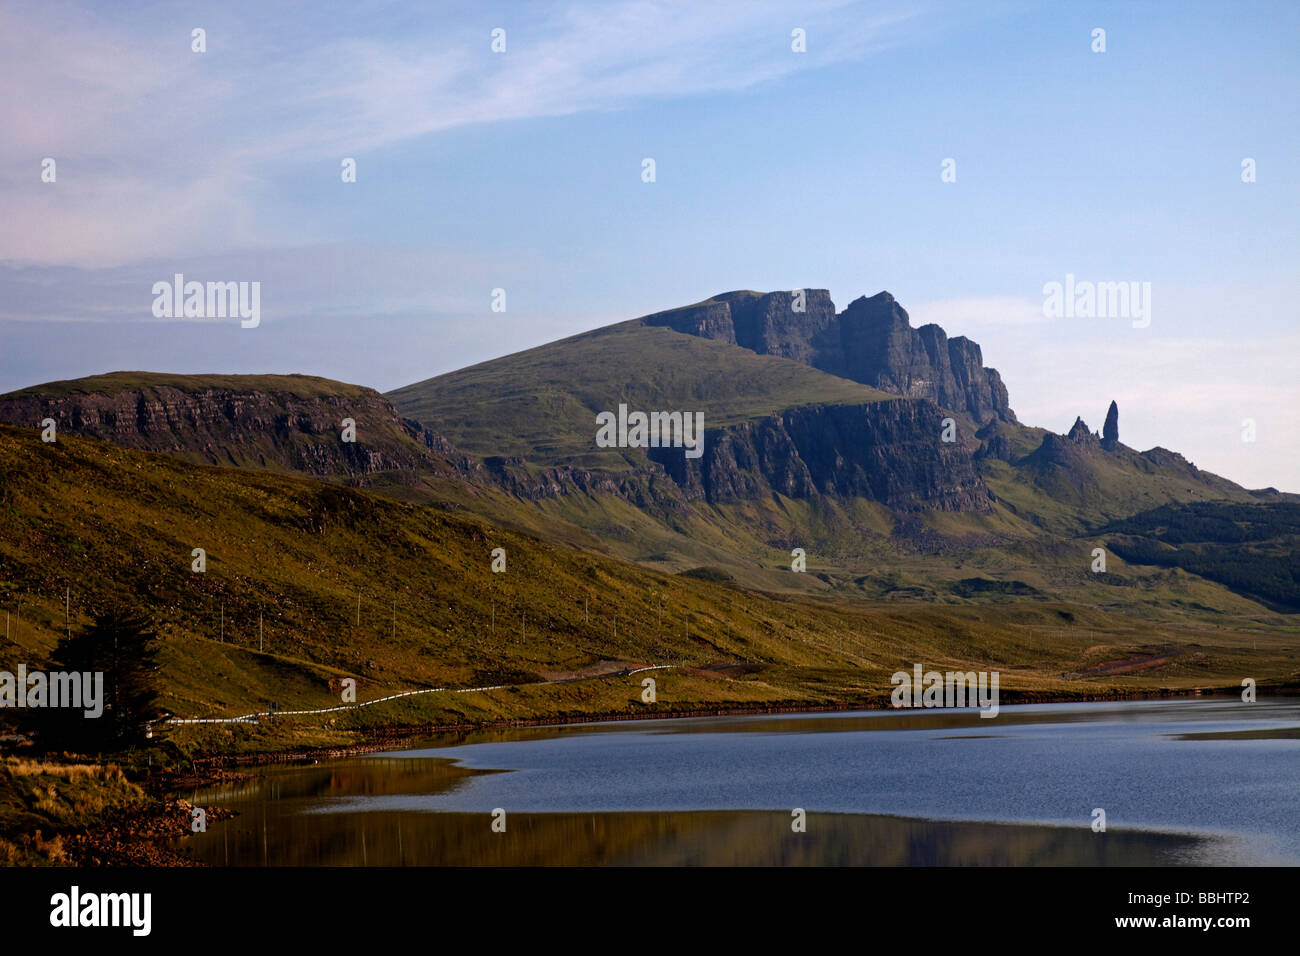 Old Man of Storr, with Loch Fada in foreground, Isle of Skye, Inner Hebrides, Scotland, UK, Europe Stock Photo